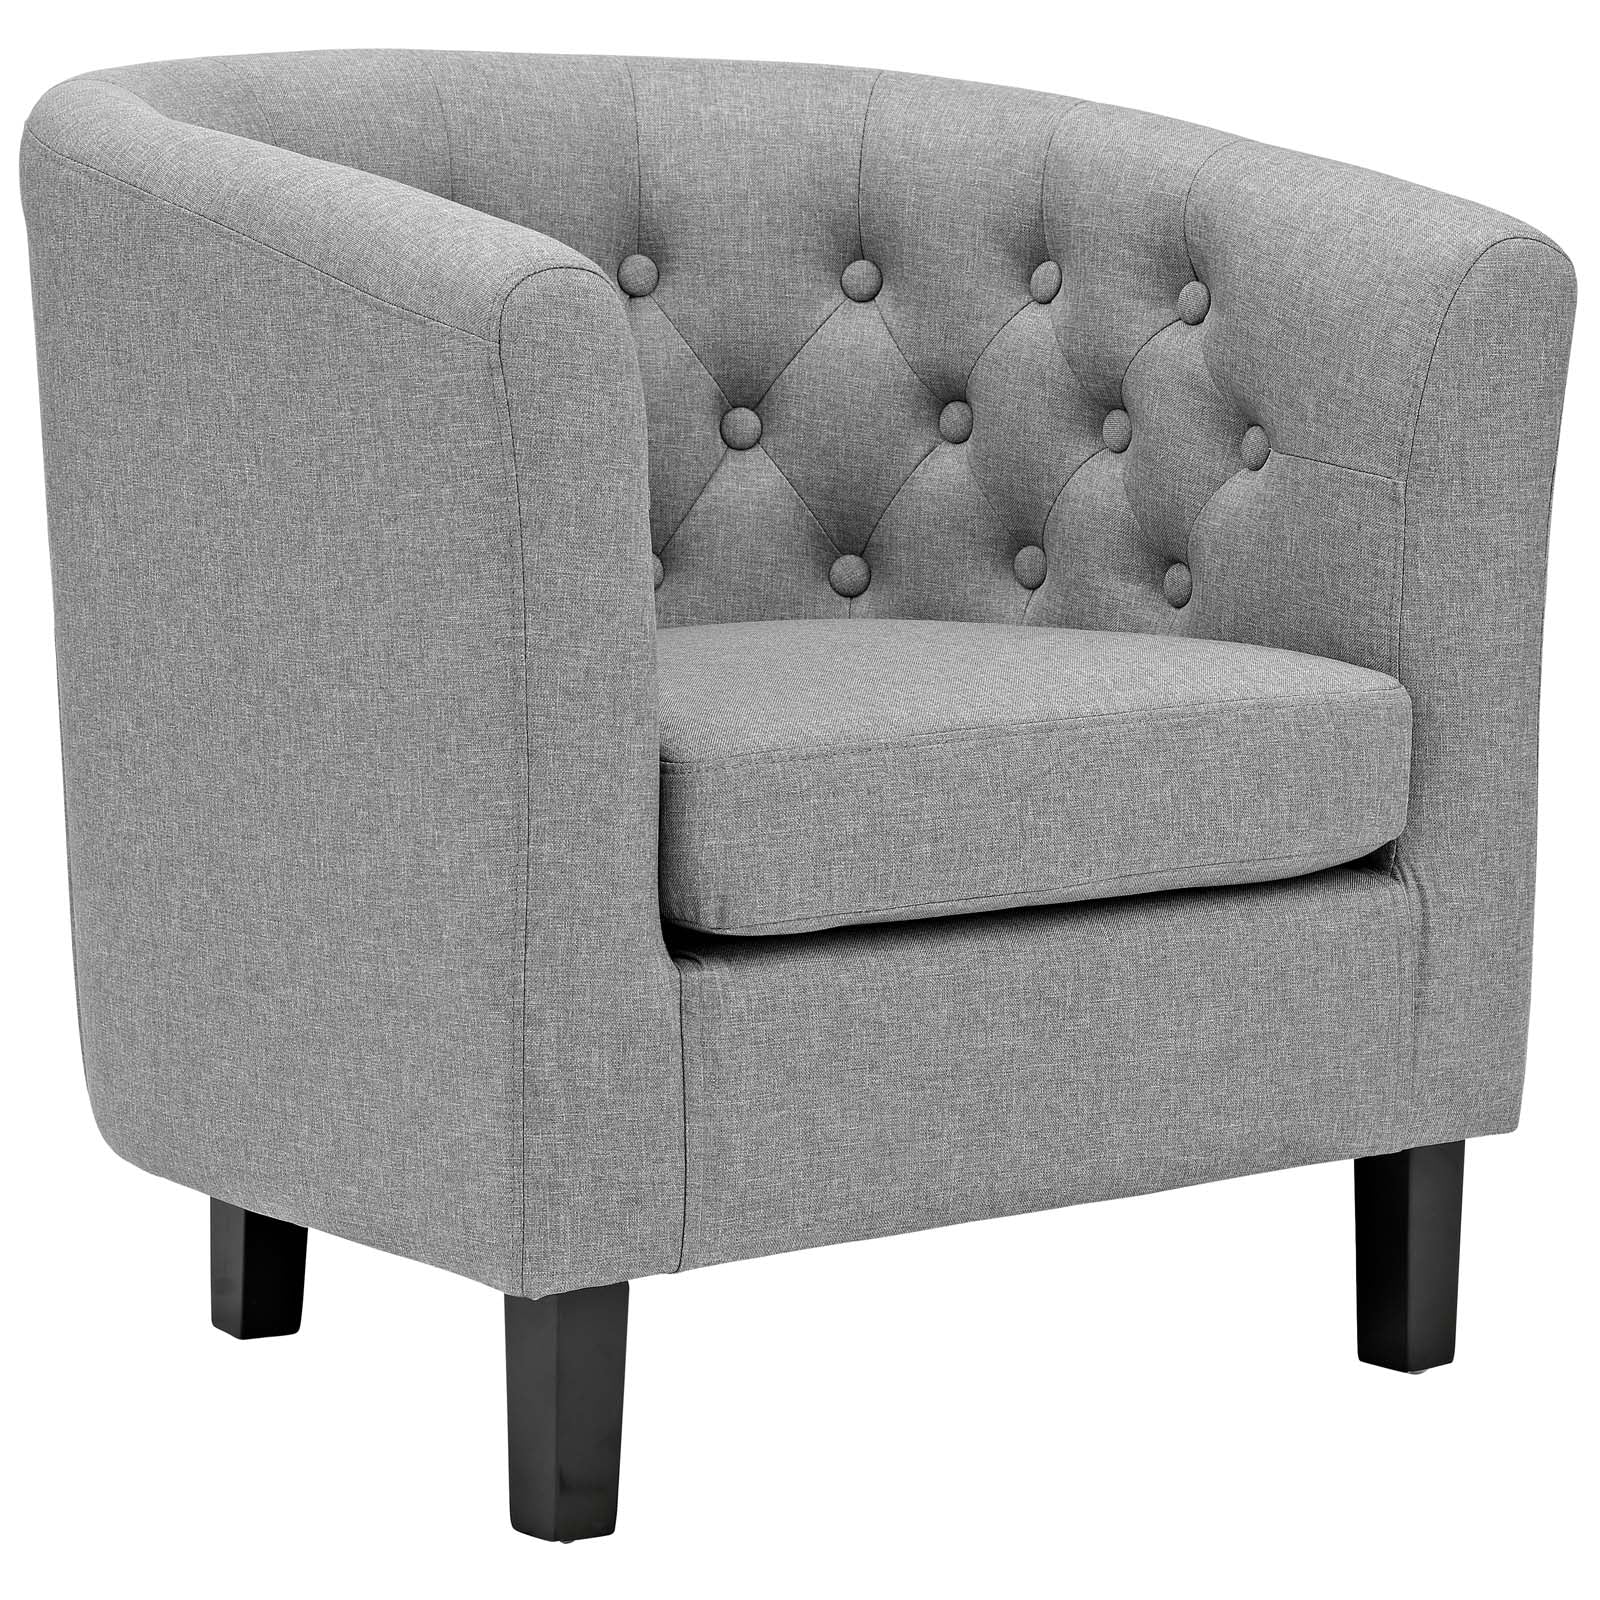 Modway Chairs - Prospect Upholstered Fabric Armchair Light Gray